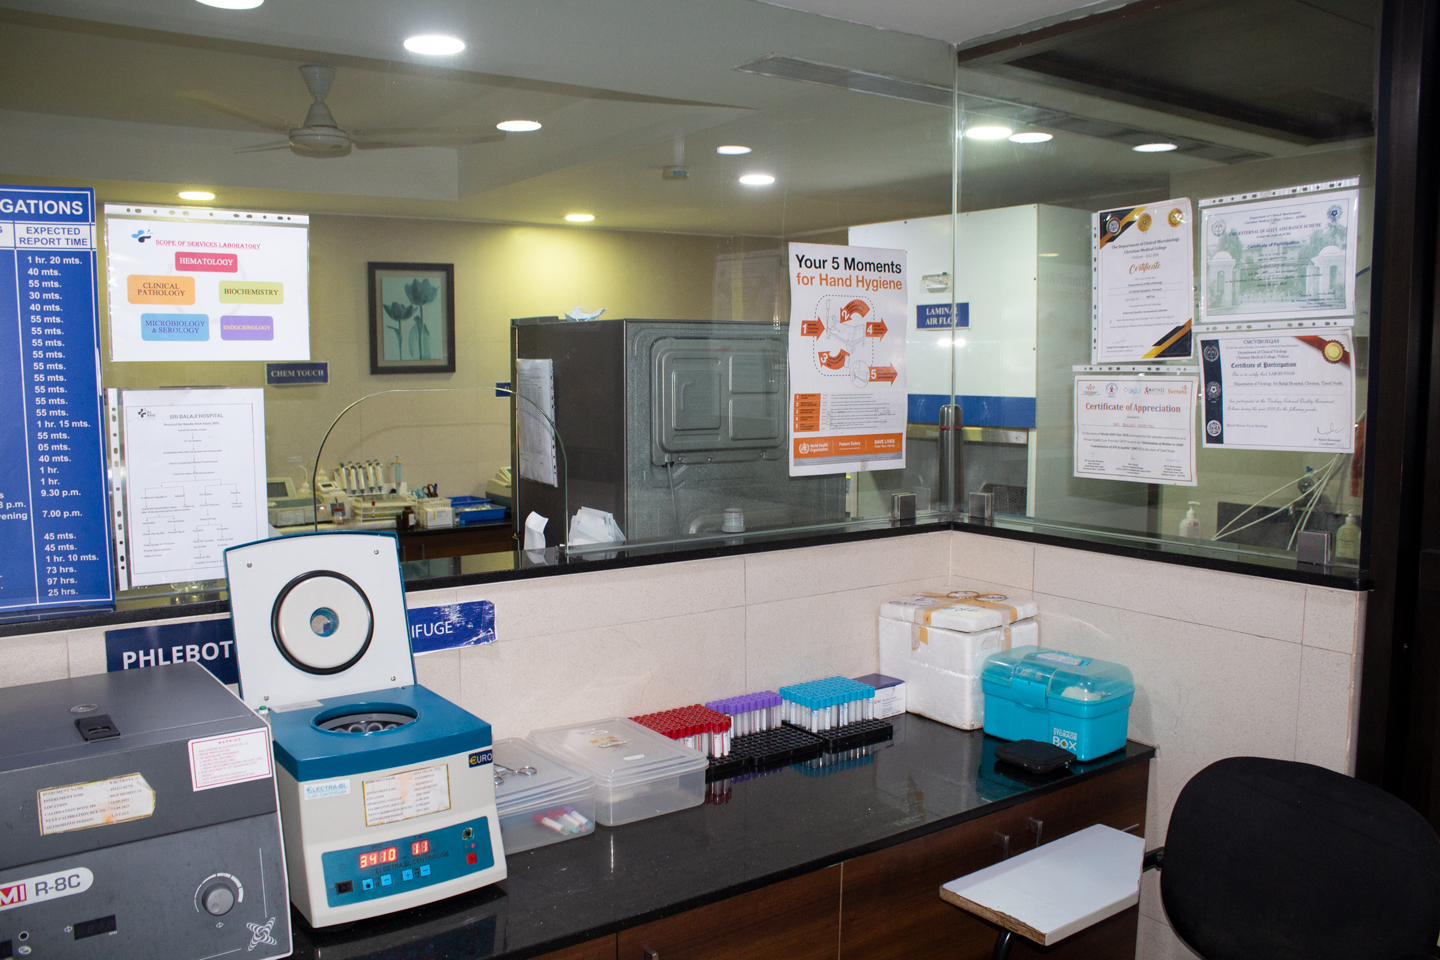 A view of the lab infrastructure at Sri Balaji Hospital with certificates of Appreciation.